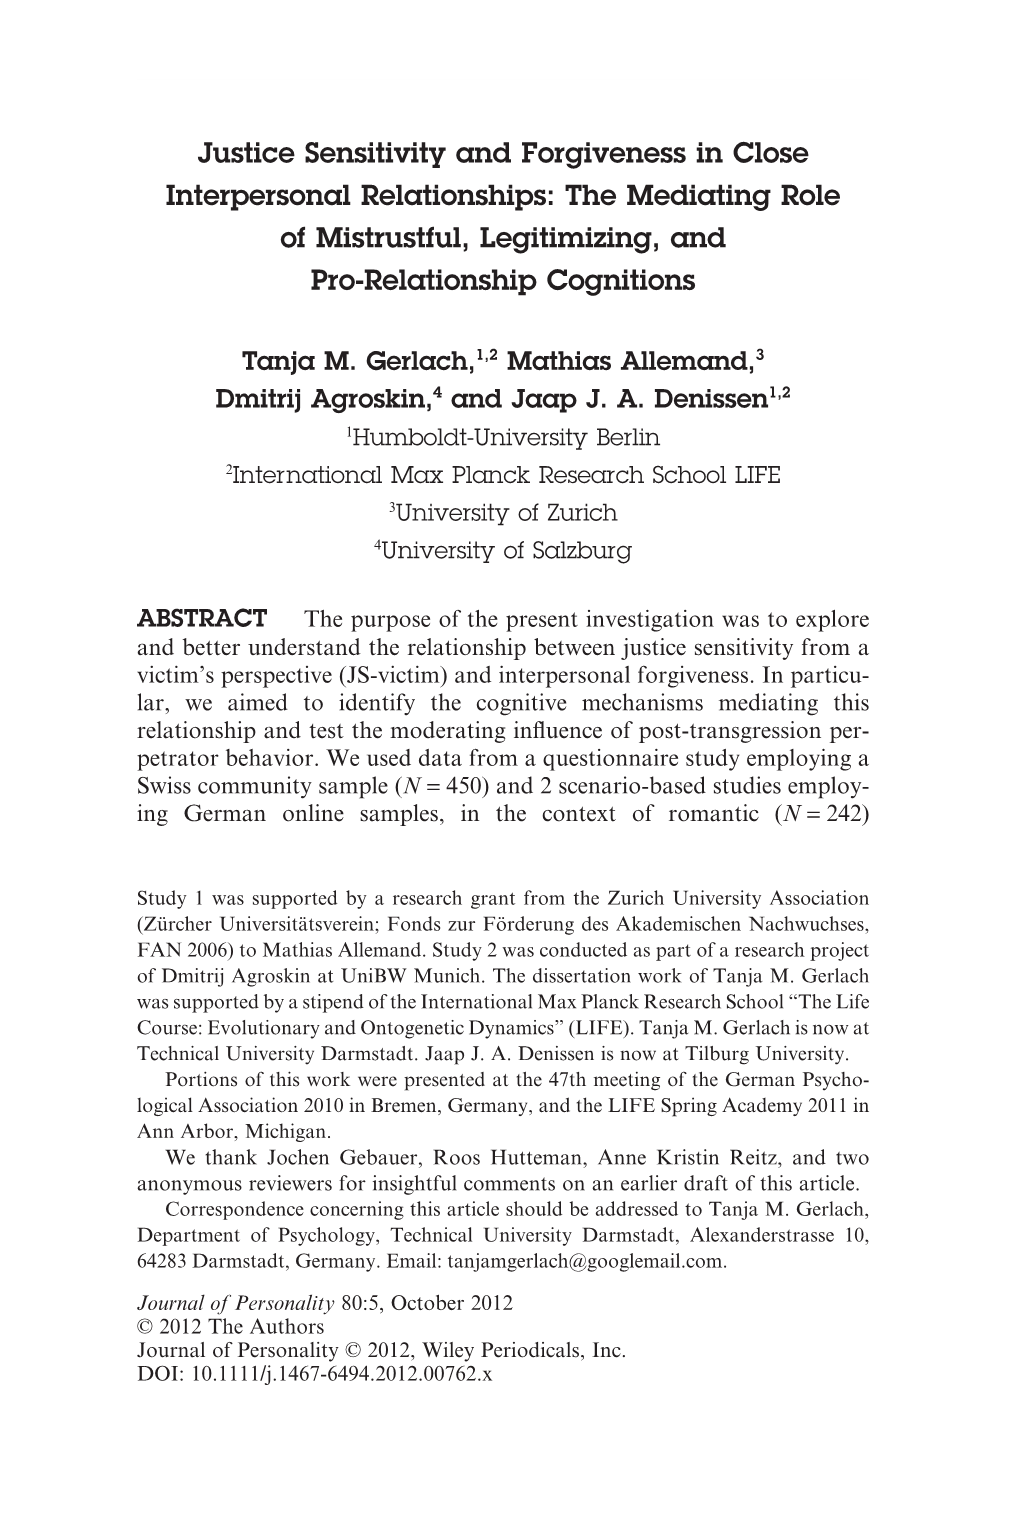 Justice Sensitivity and Forgiveness in Close Interpersonal Relationships: the Mediating Role of Mistrustful, Legitimizing, and Pro-Relationship Cognitions